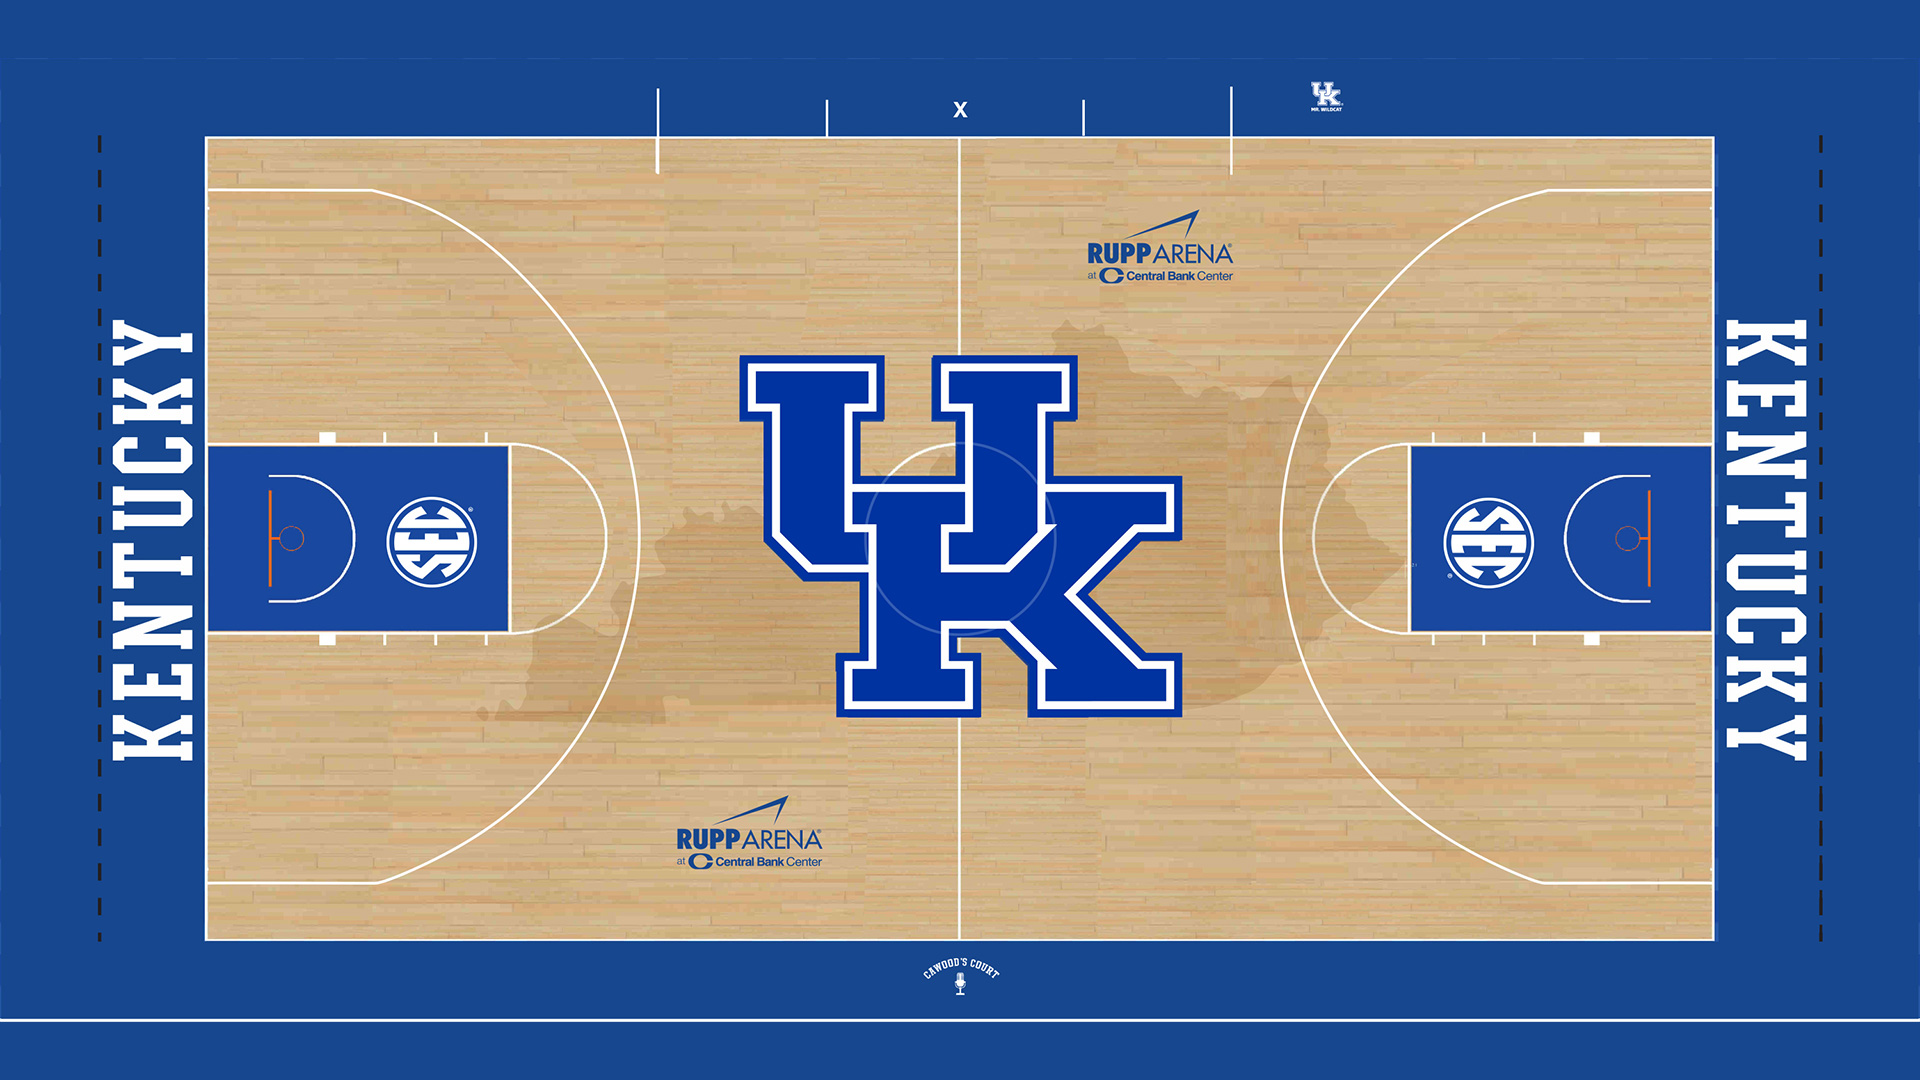 New Rupp Arena Court Design to be Installed Later This Season